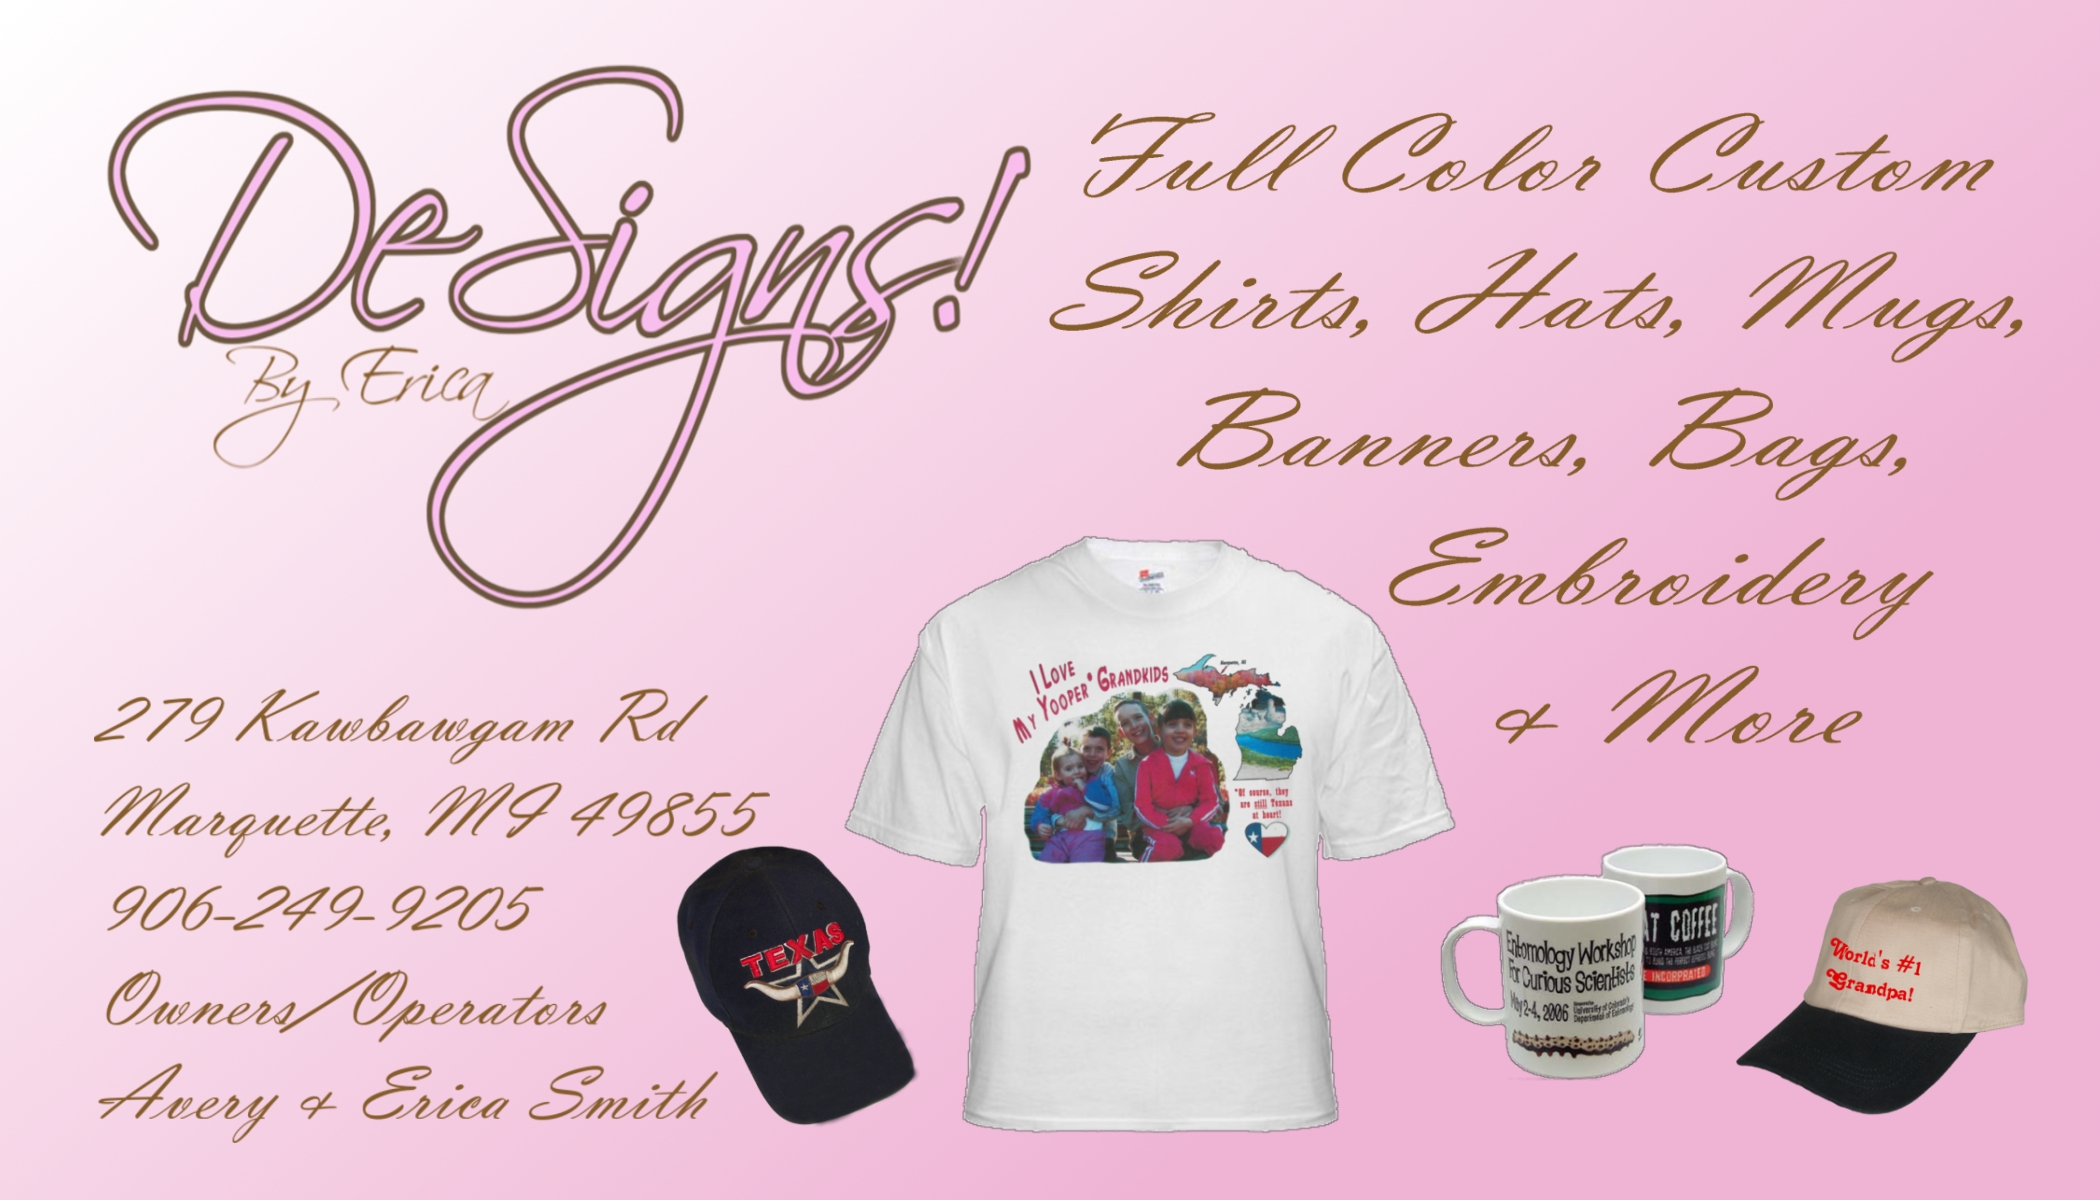 DeSigns Custom Imprinting - full color shirts, bags, coffee mugs and more, custom made for every customer!